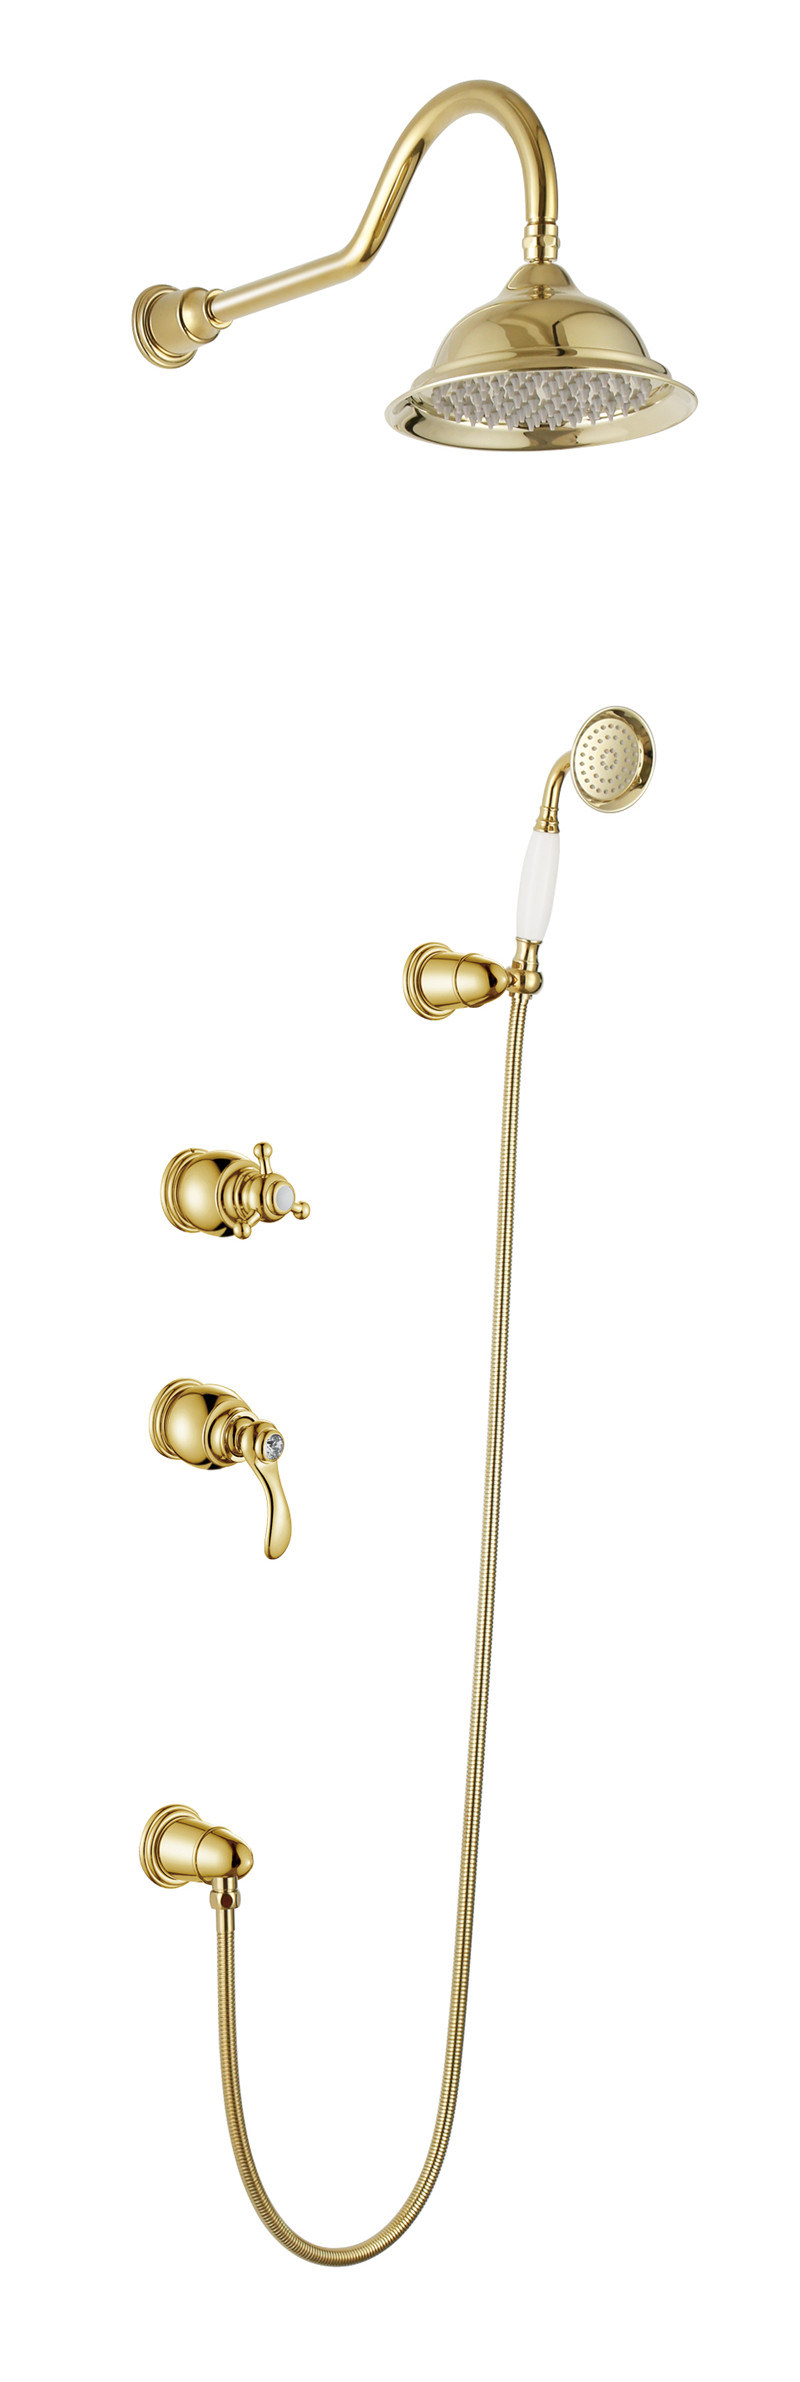 Wall Mounted Antique Brass Concealed Shower Set (zf-W55)